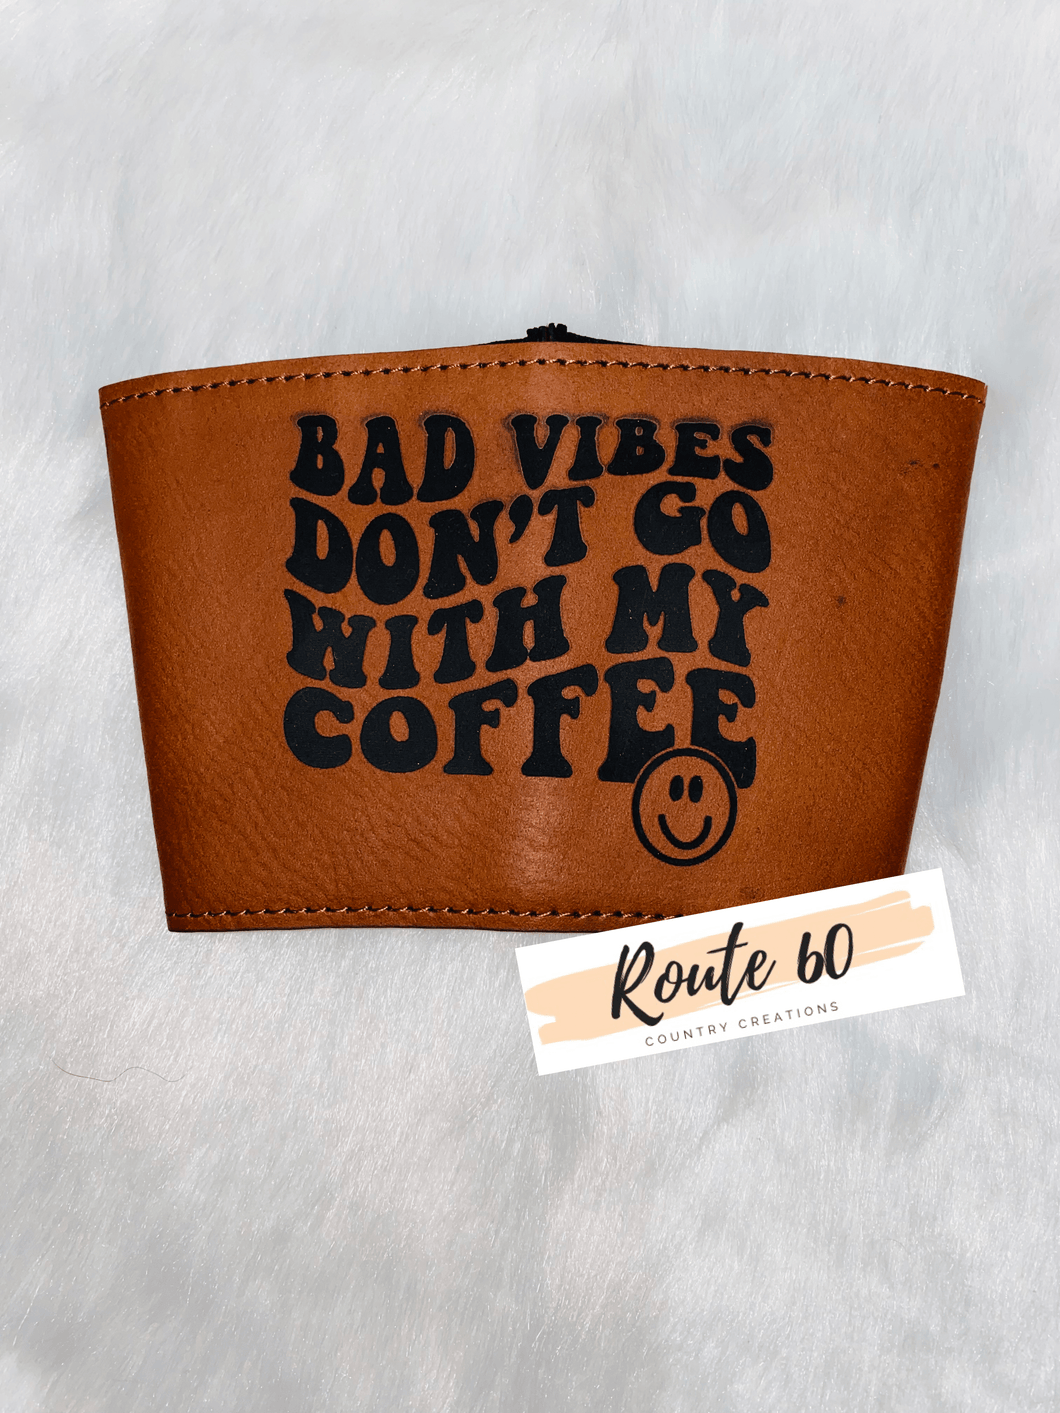 Bad Vibes Don’t go with my coffee Coffee Sleeve